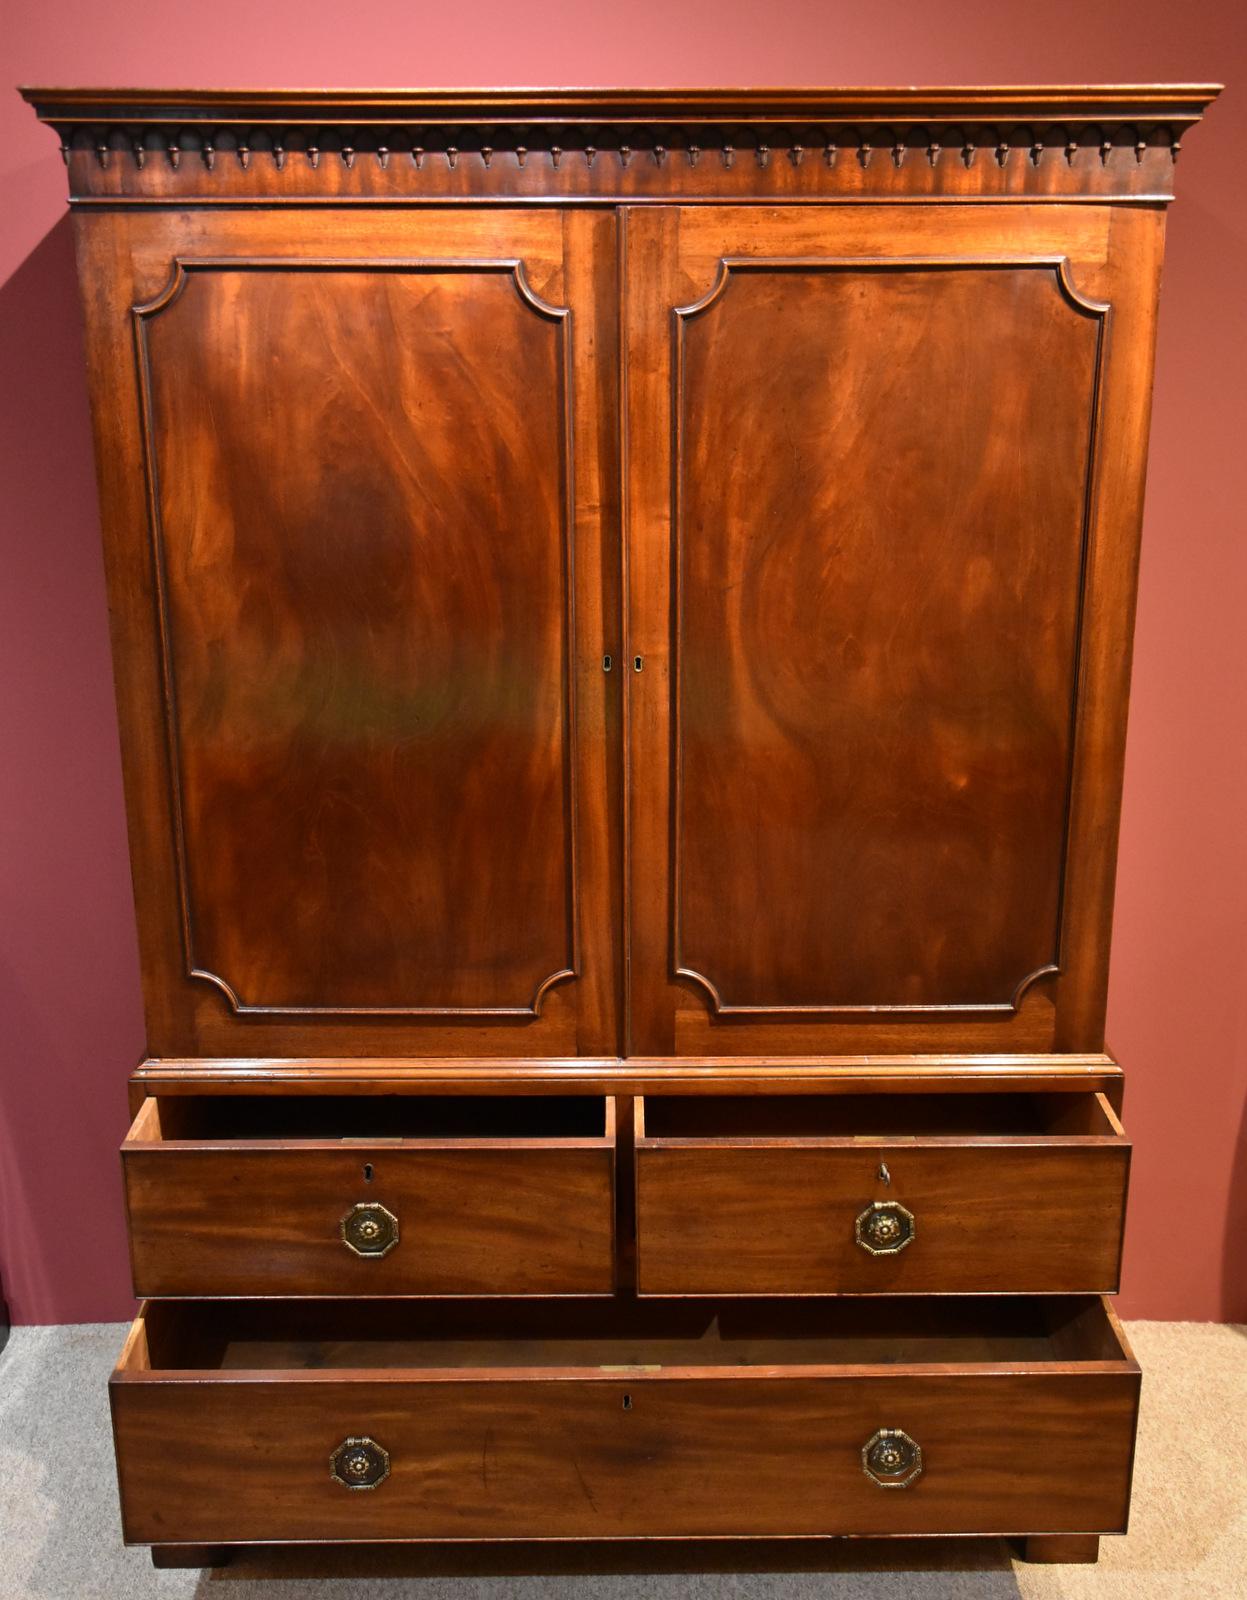 A superb mid-18th century mahogany linen press of superb color. The interior has been converted into half hanging and half trays.

Dimensions:
Height 72.5